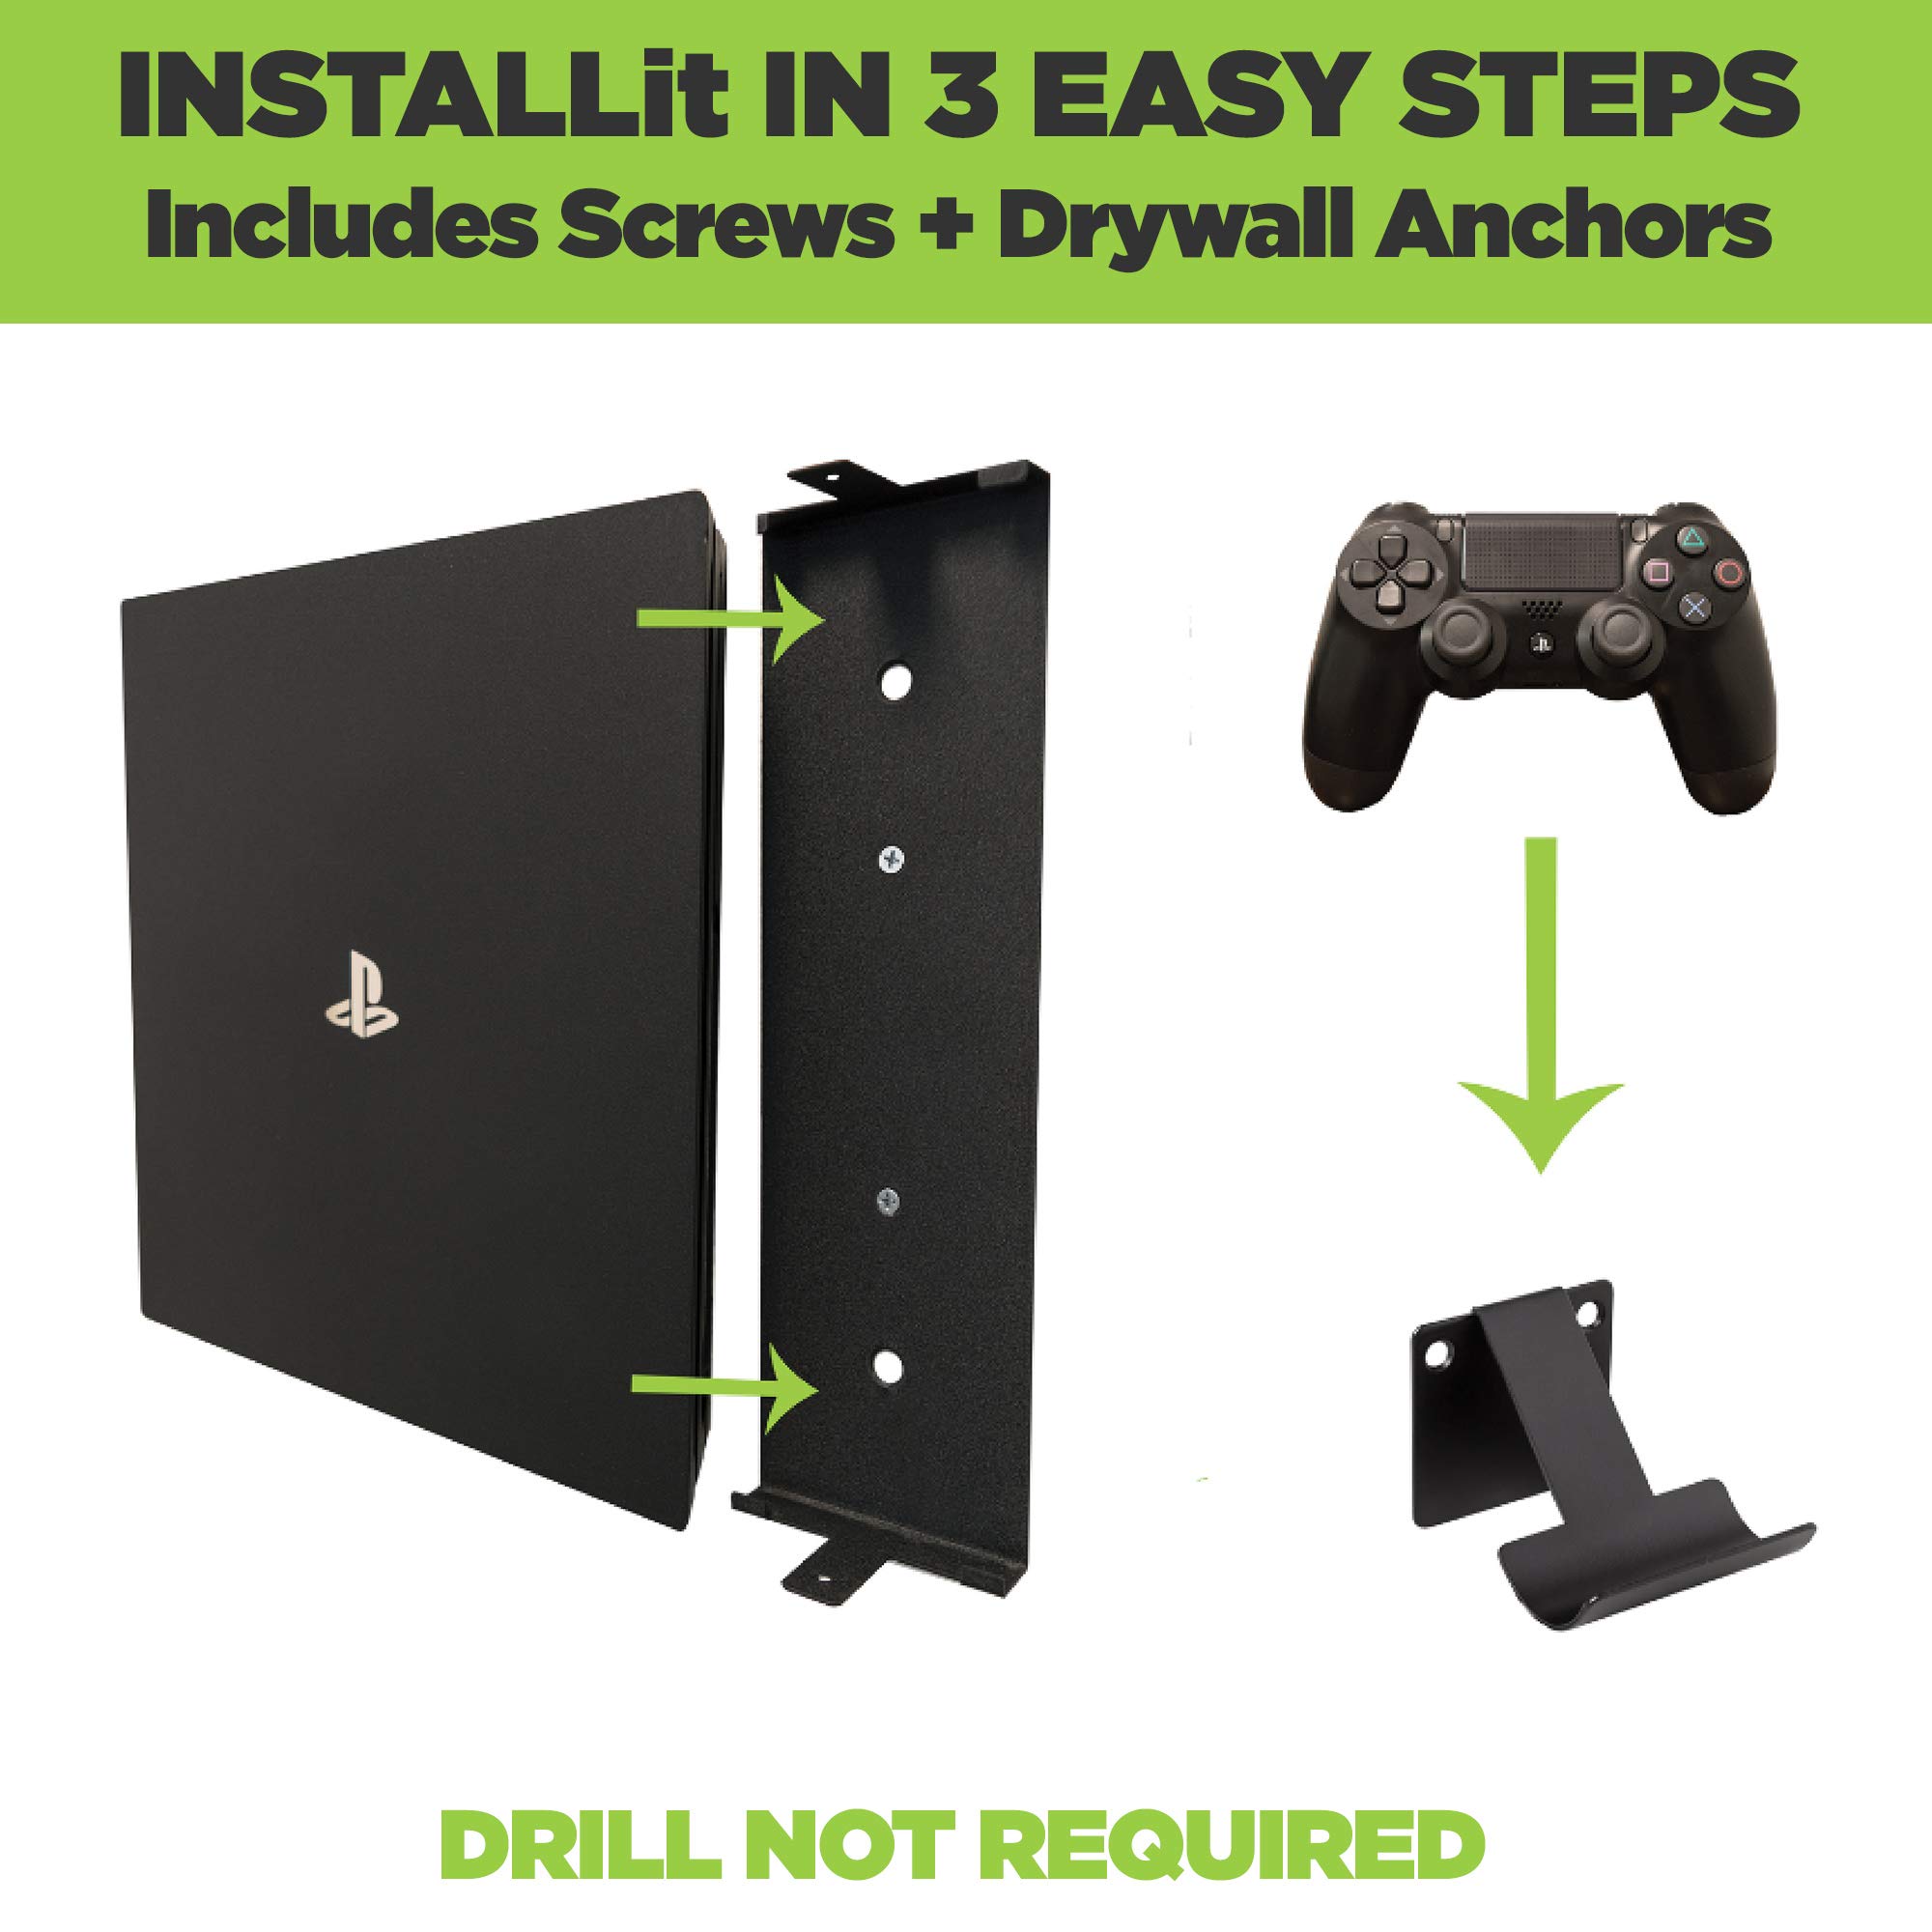 HIDEit Mounts 4P Bundle, Wall Mounts for PS4 Pro and Controller, Steel Wall Mount for PS4 Pro and 2 Controller Mounts to Safely Store Your PS4 Pro and Playstation Controller Near or Behind TV